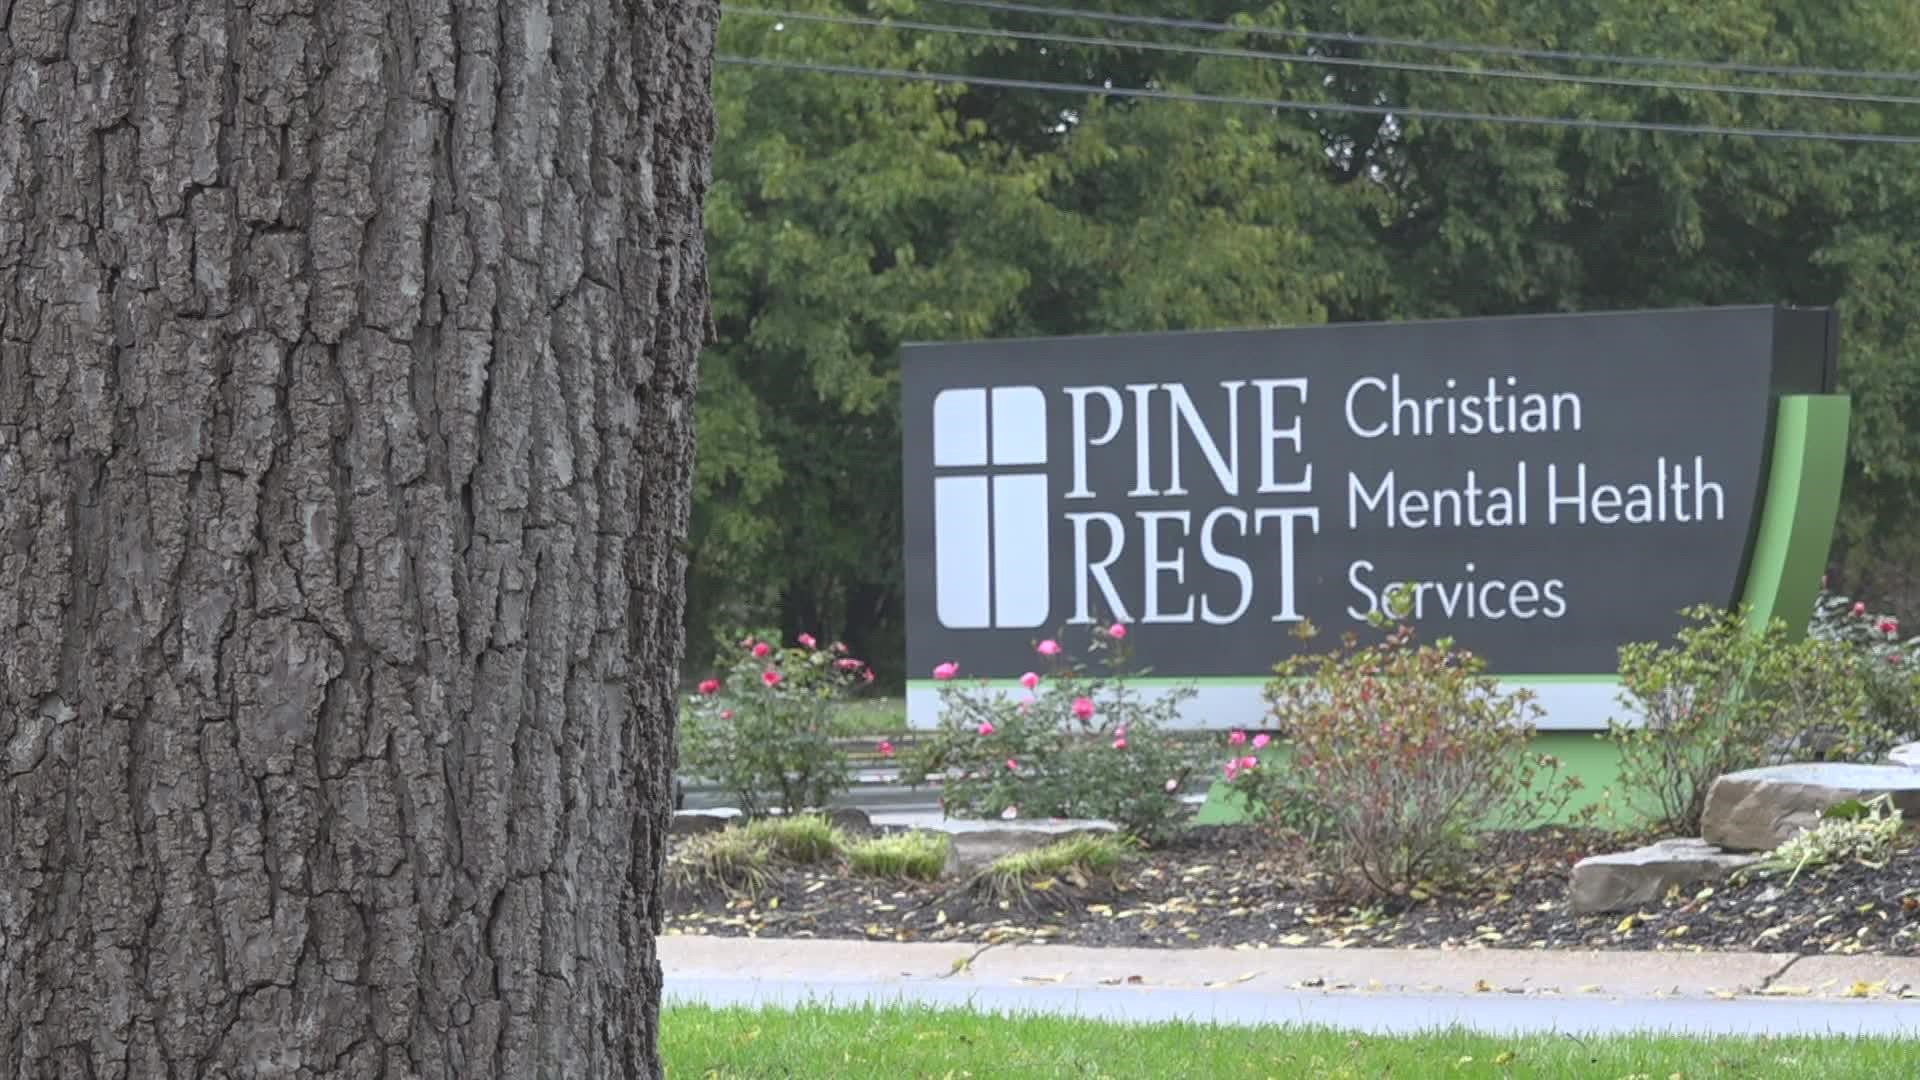 "Our child or adolescence turn-aways in the last few months are up 600% over pre-pandemic levels," said the vice president of Pine Rest.